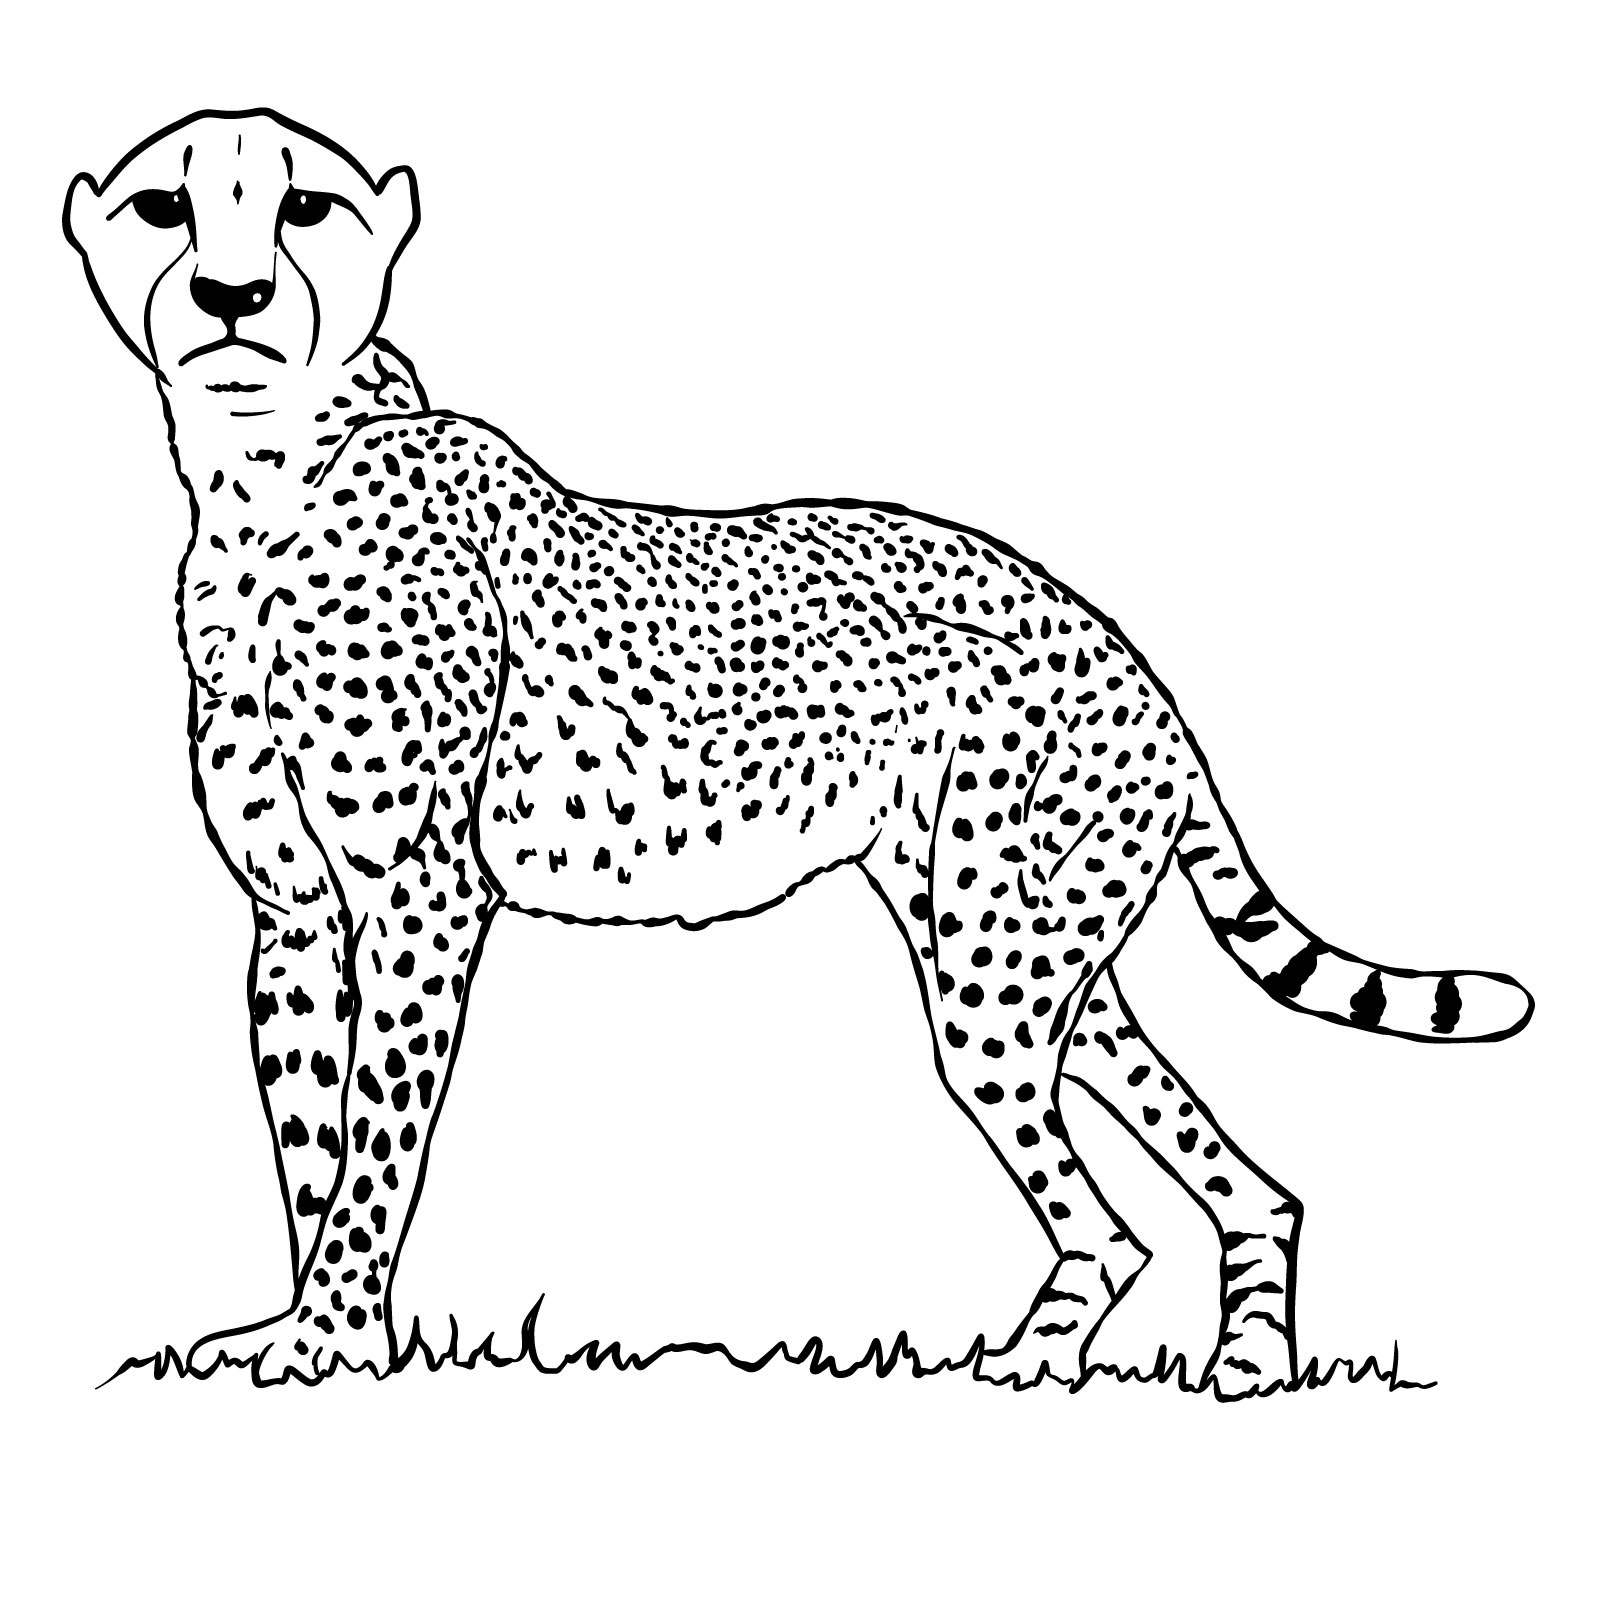 How to draw a Cheetah - final step